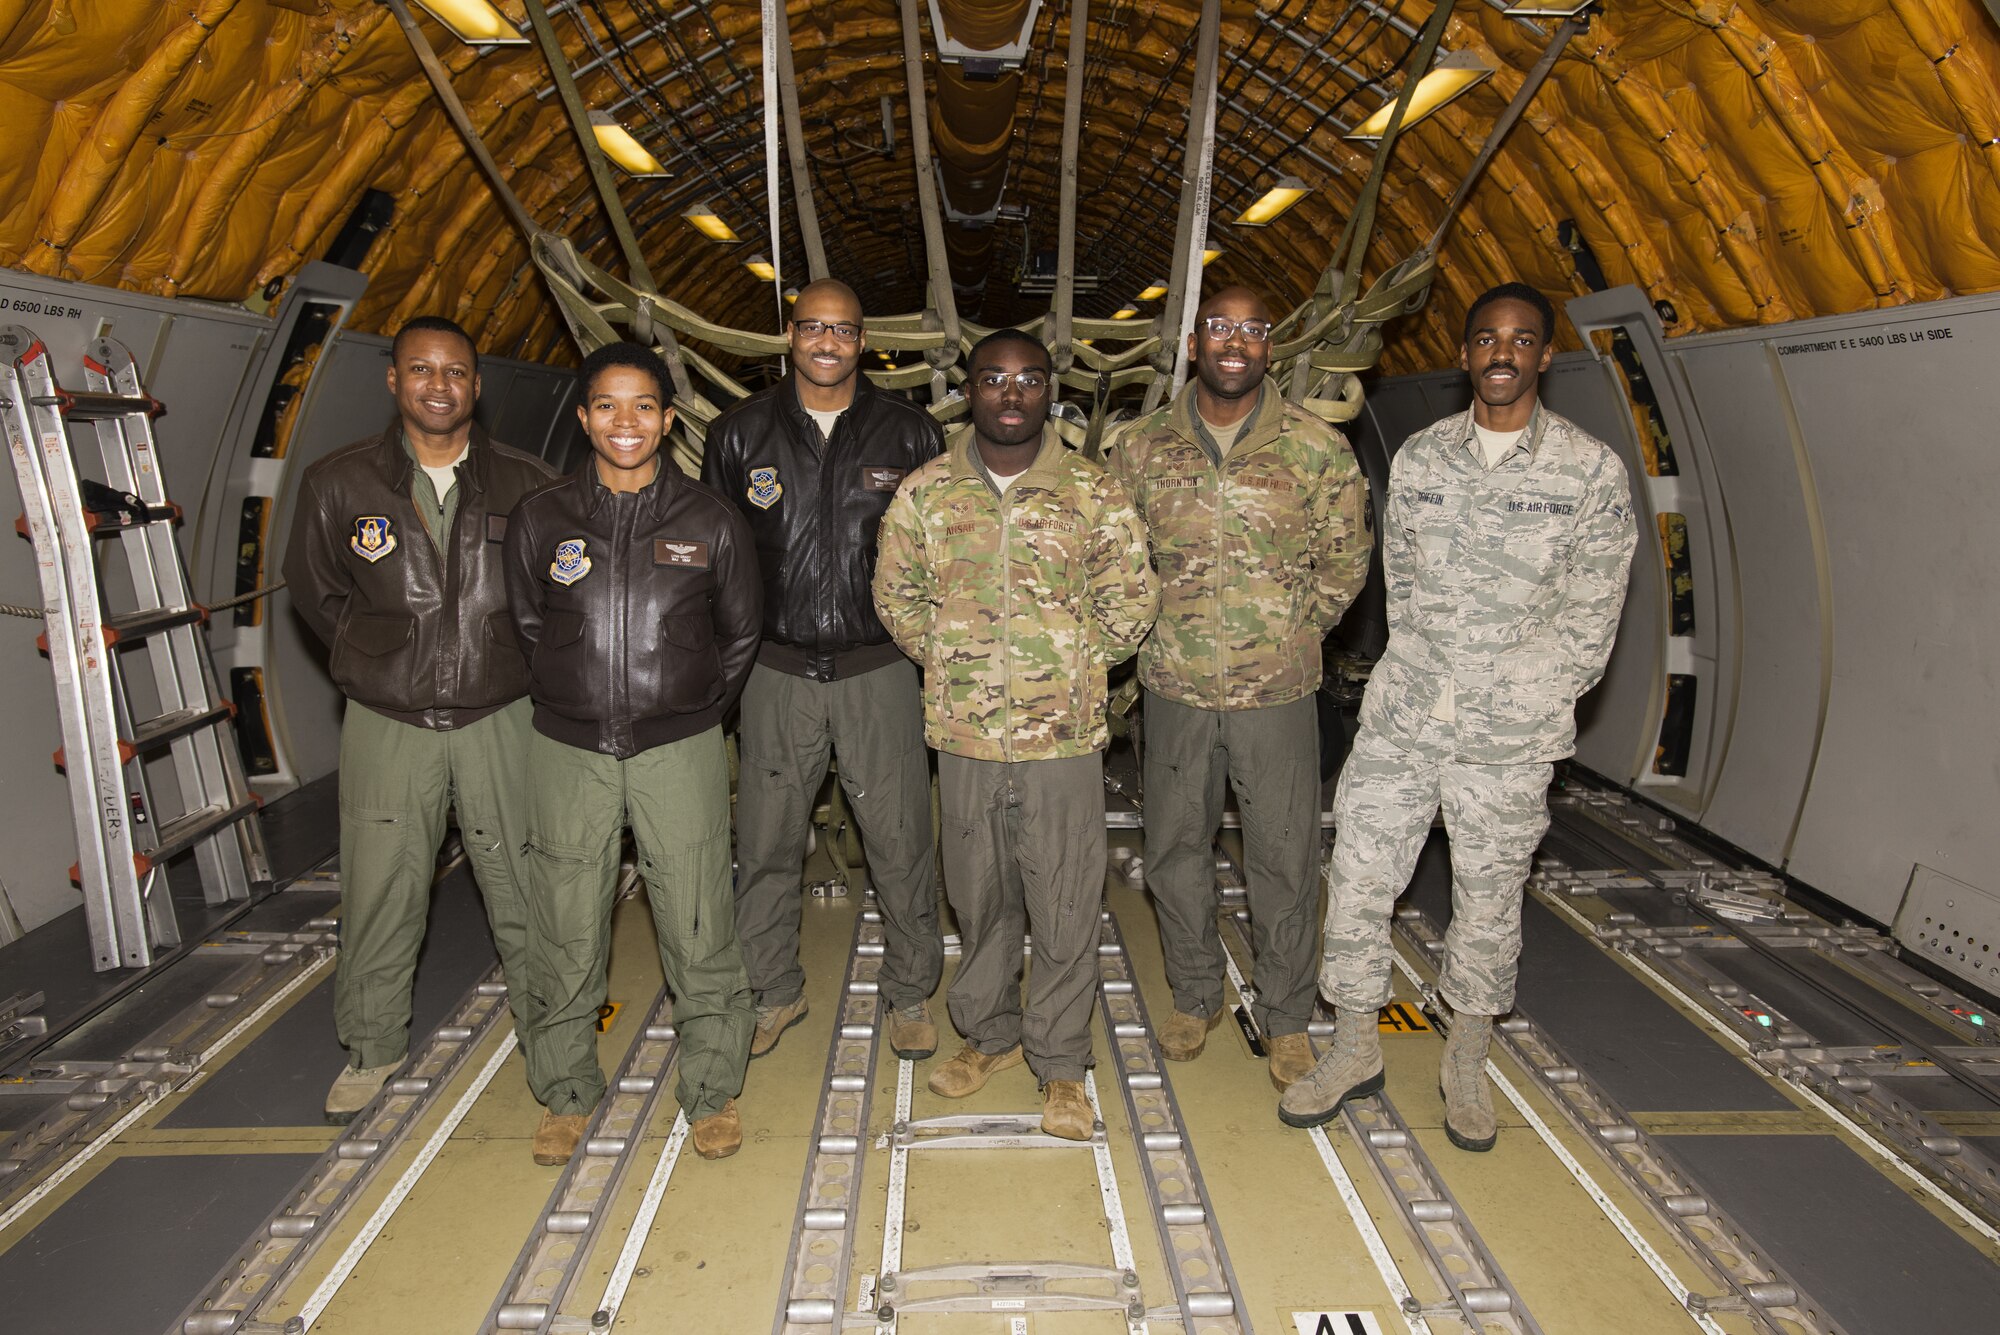 Airmen assigned to Joint Base McGuire-Dix-Lakehurst, New Jersey, pose for a photo on a KC-10 Extender after a Black History Month heritage air-refueling flight on Joint Base MDL. The KC-10, assigned to the 305th Air Mobility Wing, was piloted by an all-African-American crew; two pilots, one from the 514th Air Mobility Wing and one from the 305th AMW, a 32nd Air Refueling Squadron boom operator, one 2nd Air Refueling Squadron flight engineer and 605th Aircraft Maintenance Squadron crew chief. (U.S. Air Force photo by Senior Airman Ariel Owings)